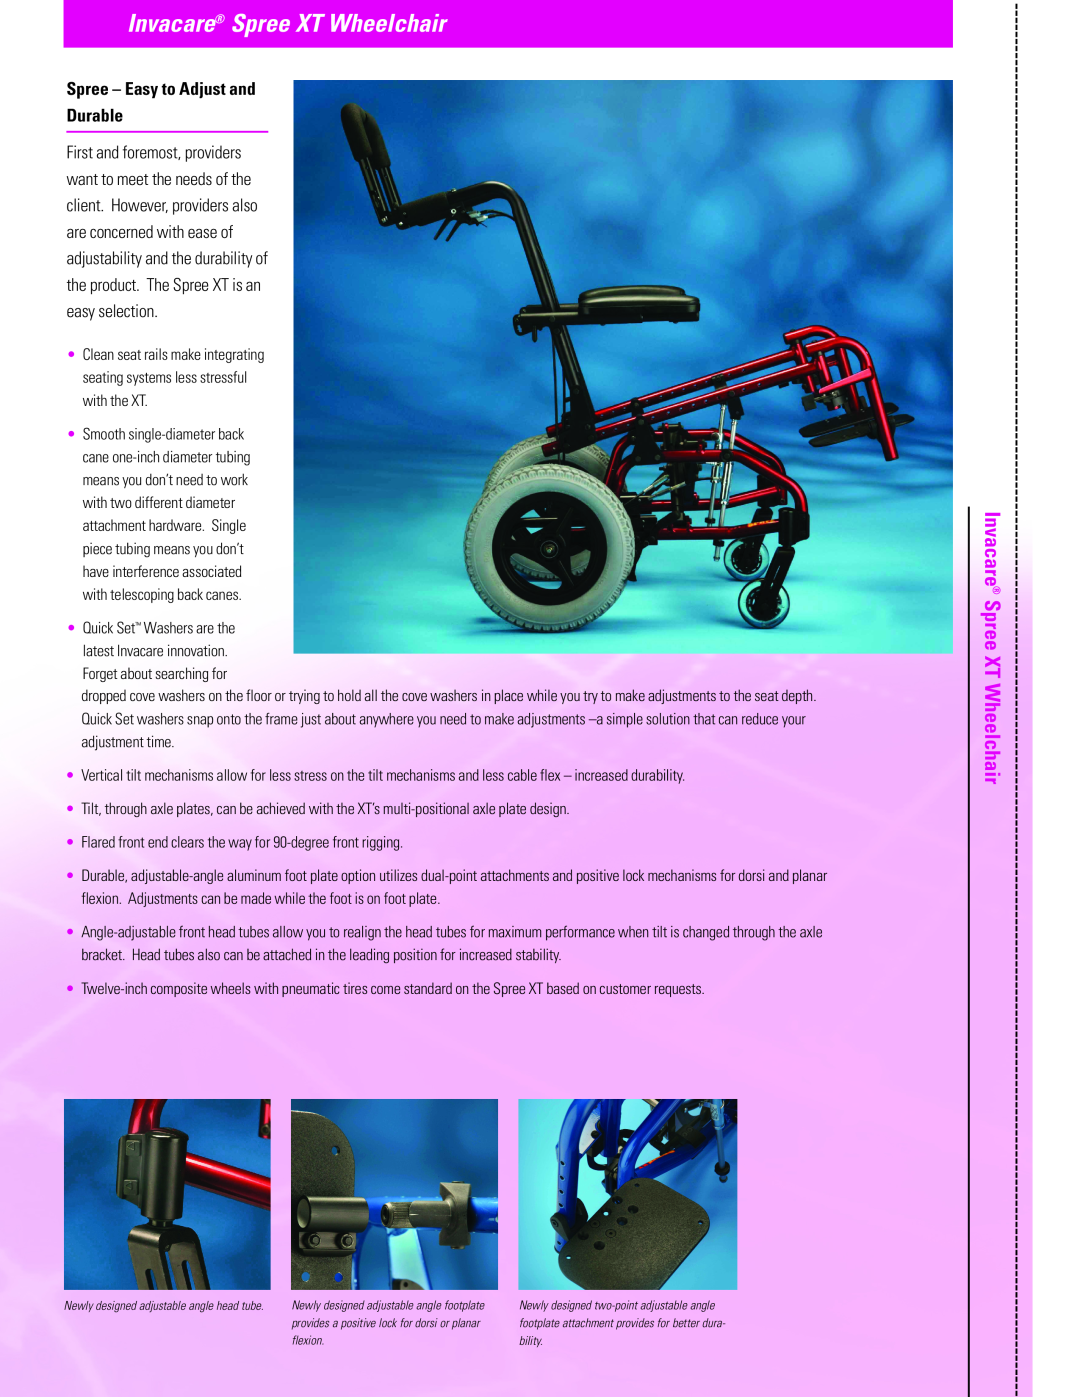 Invacare manual Spree - Easy to Adjust and Durable, Invacare Spree XT Wheelchair 